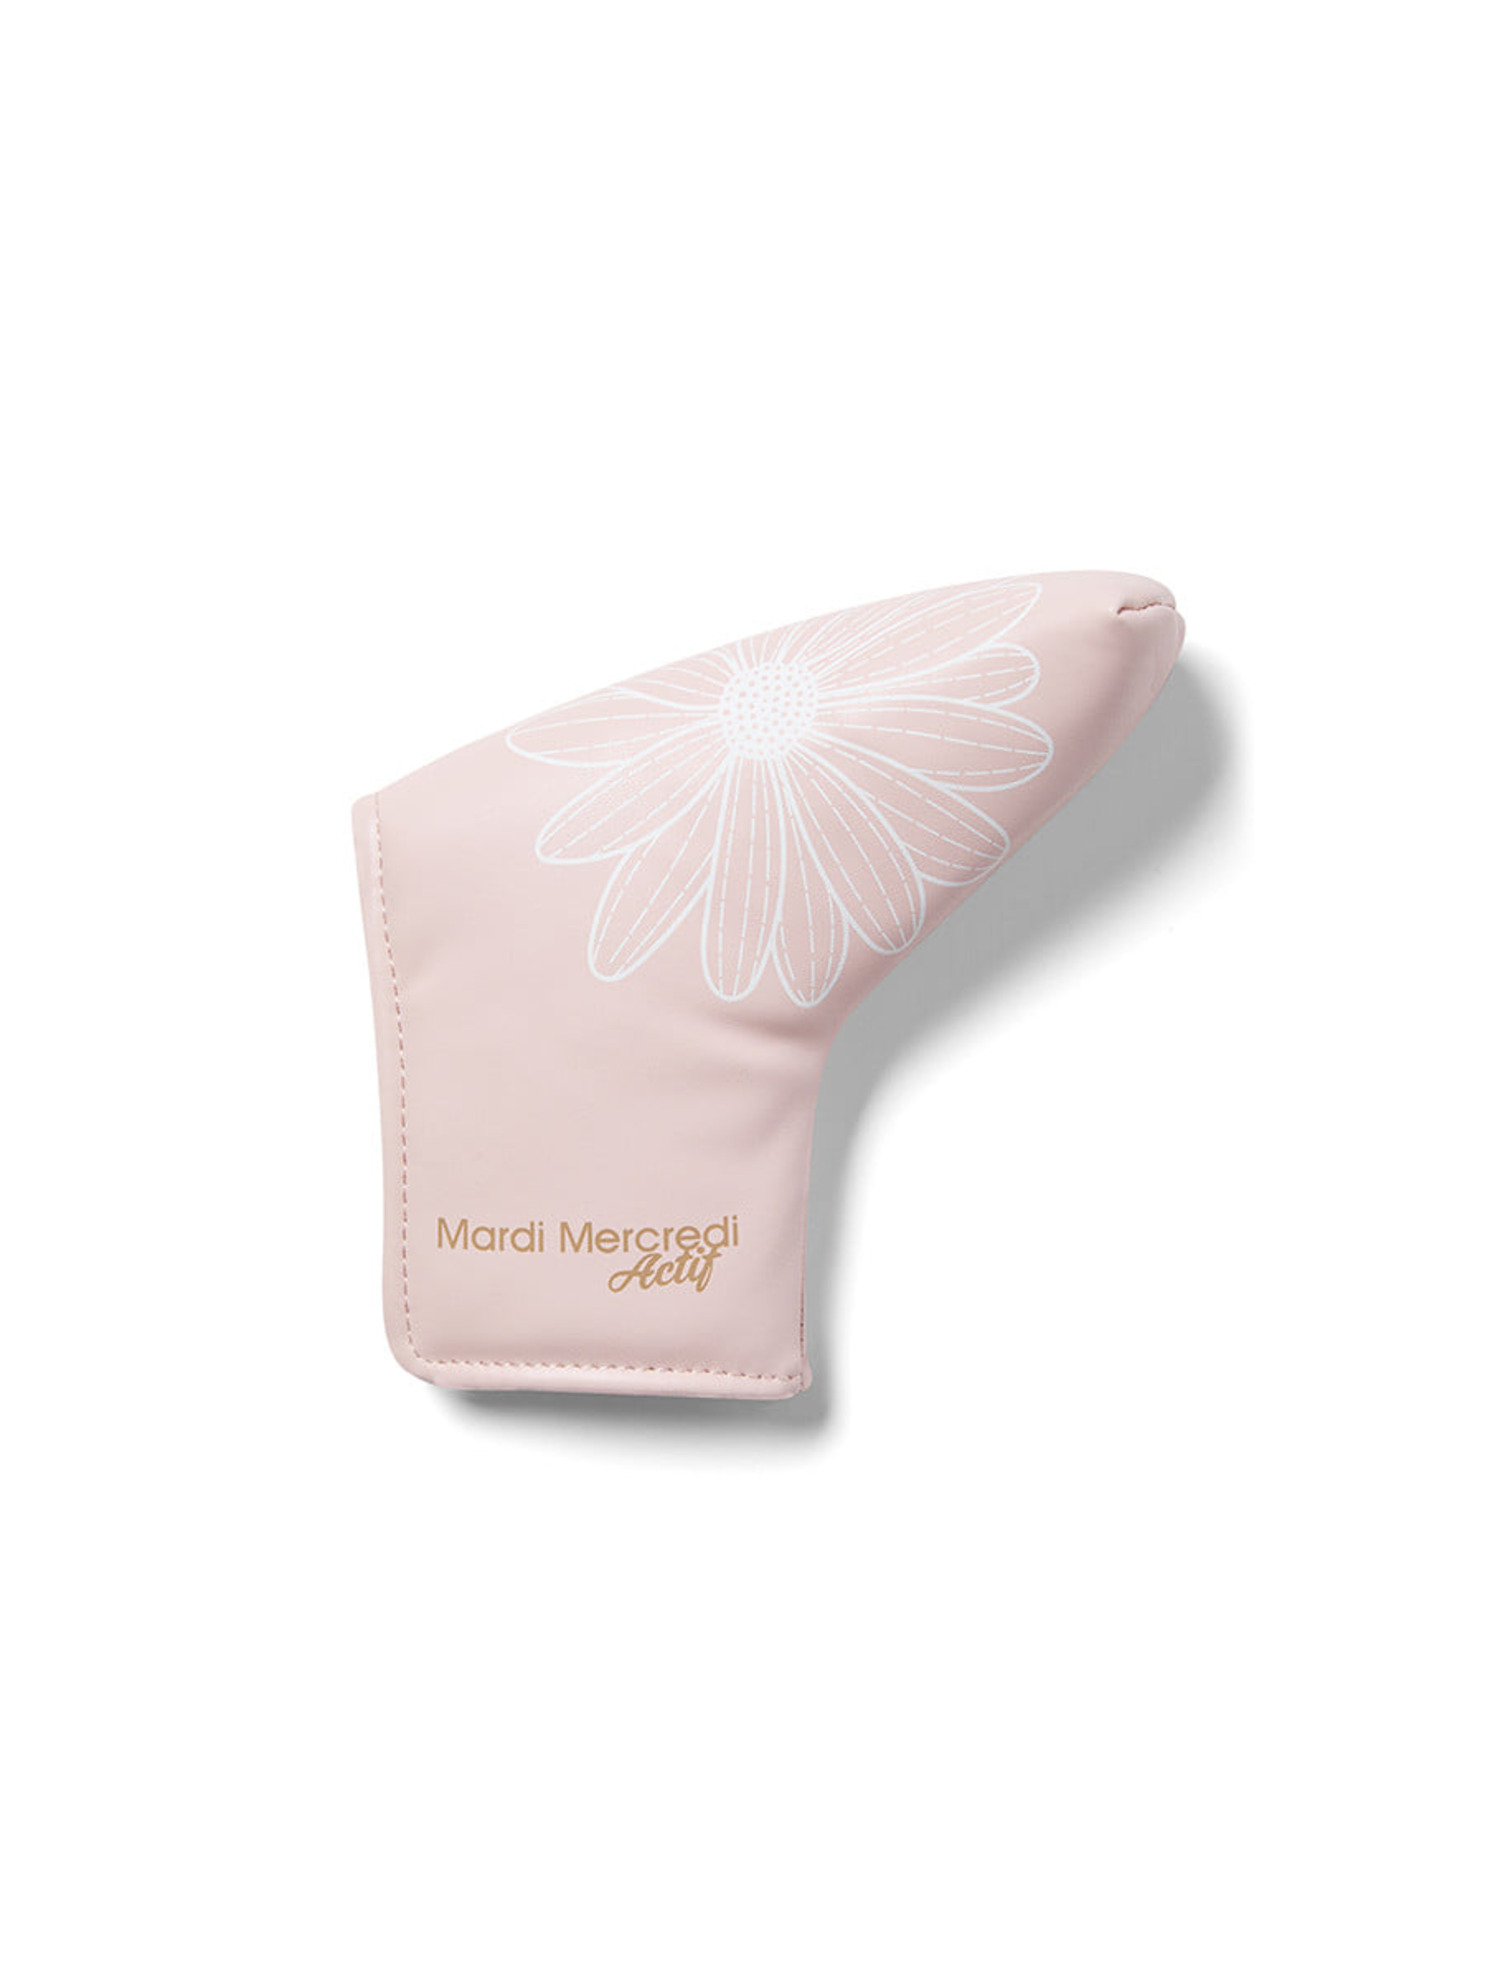 BLADE PUTTER COVER DUO FLOWERS_PINK BEIGE